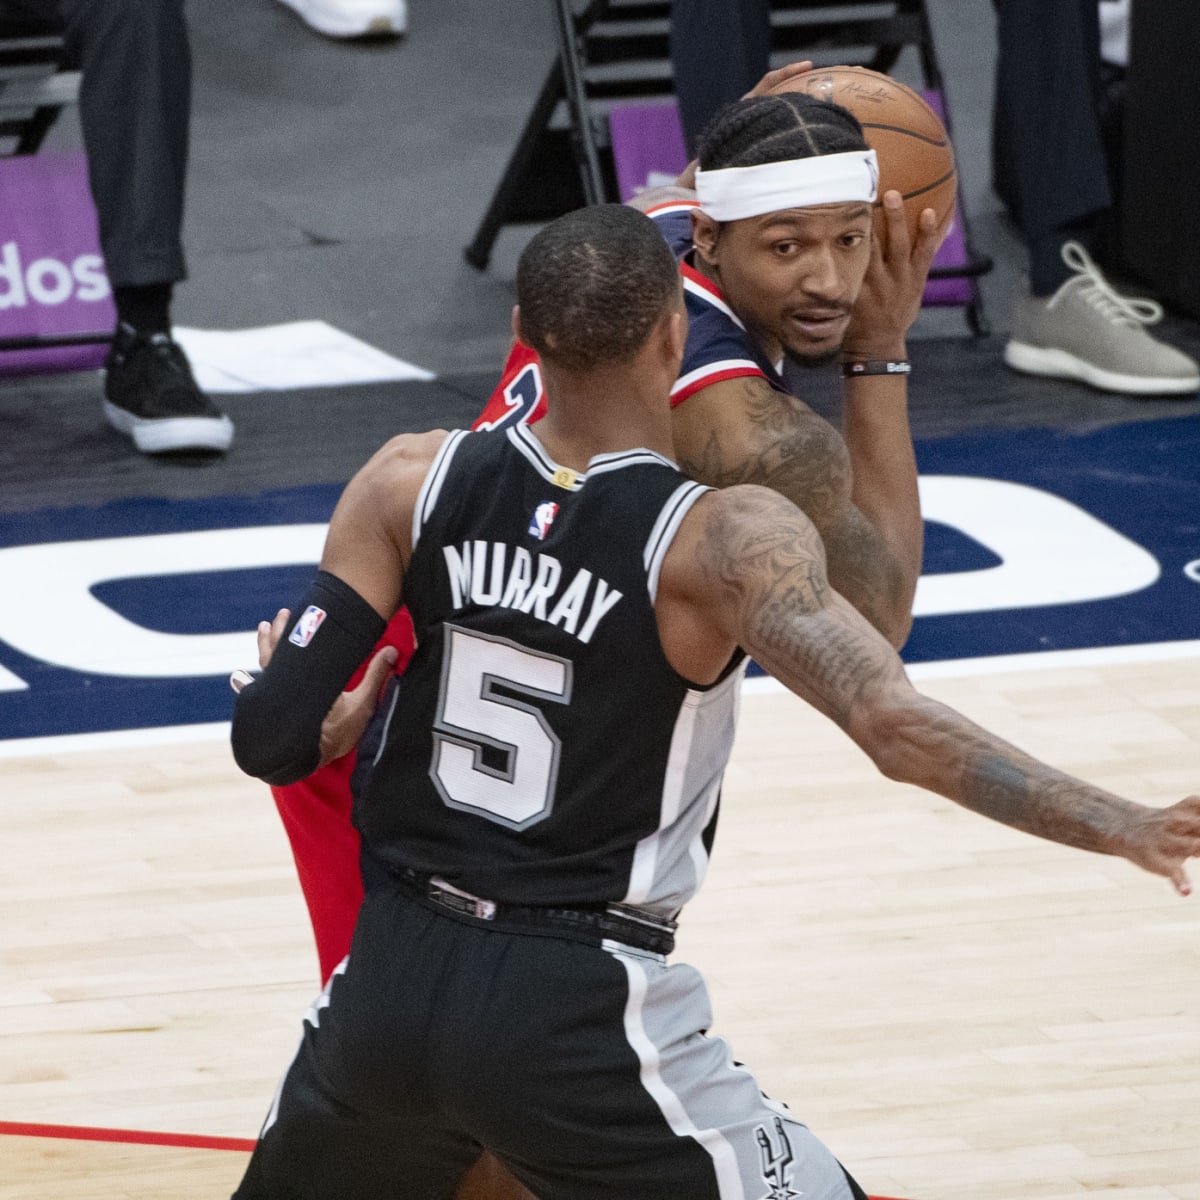 San Antonio Spurs Fiesta 5: Dejounte Murray Trade Rumors Flying - Sports  Illustrated Inside The Spurs, Analysis and More